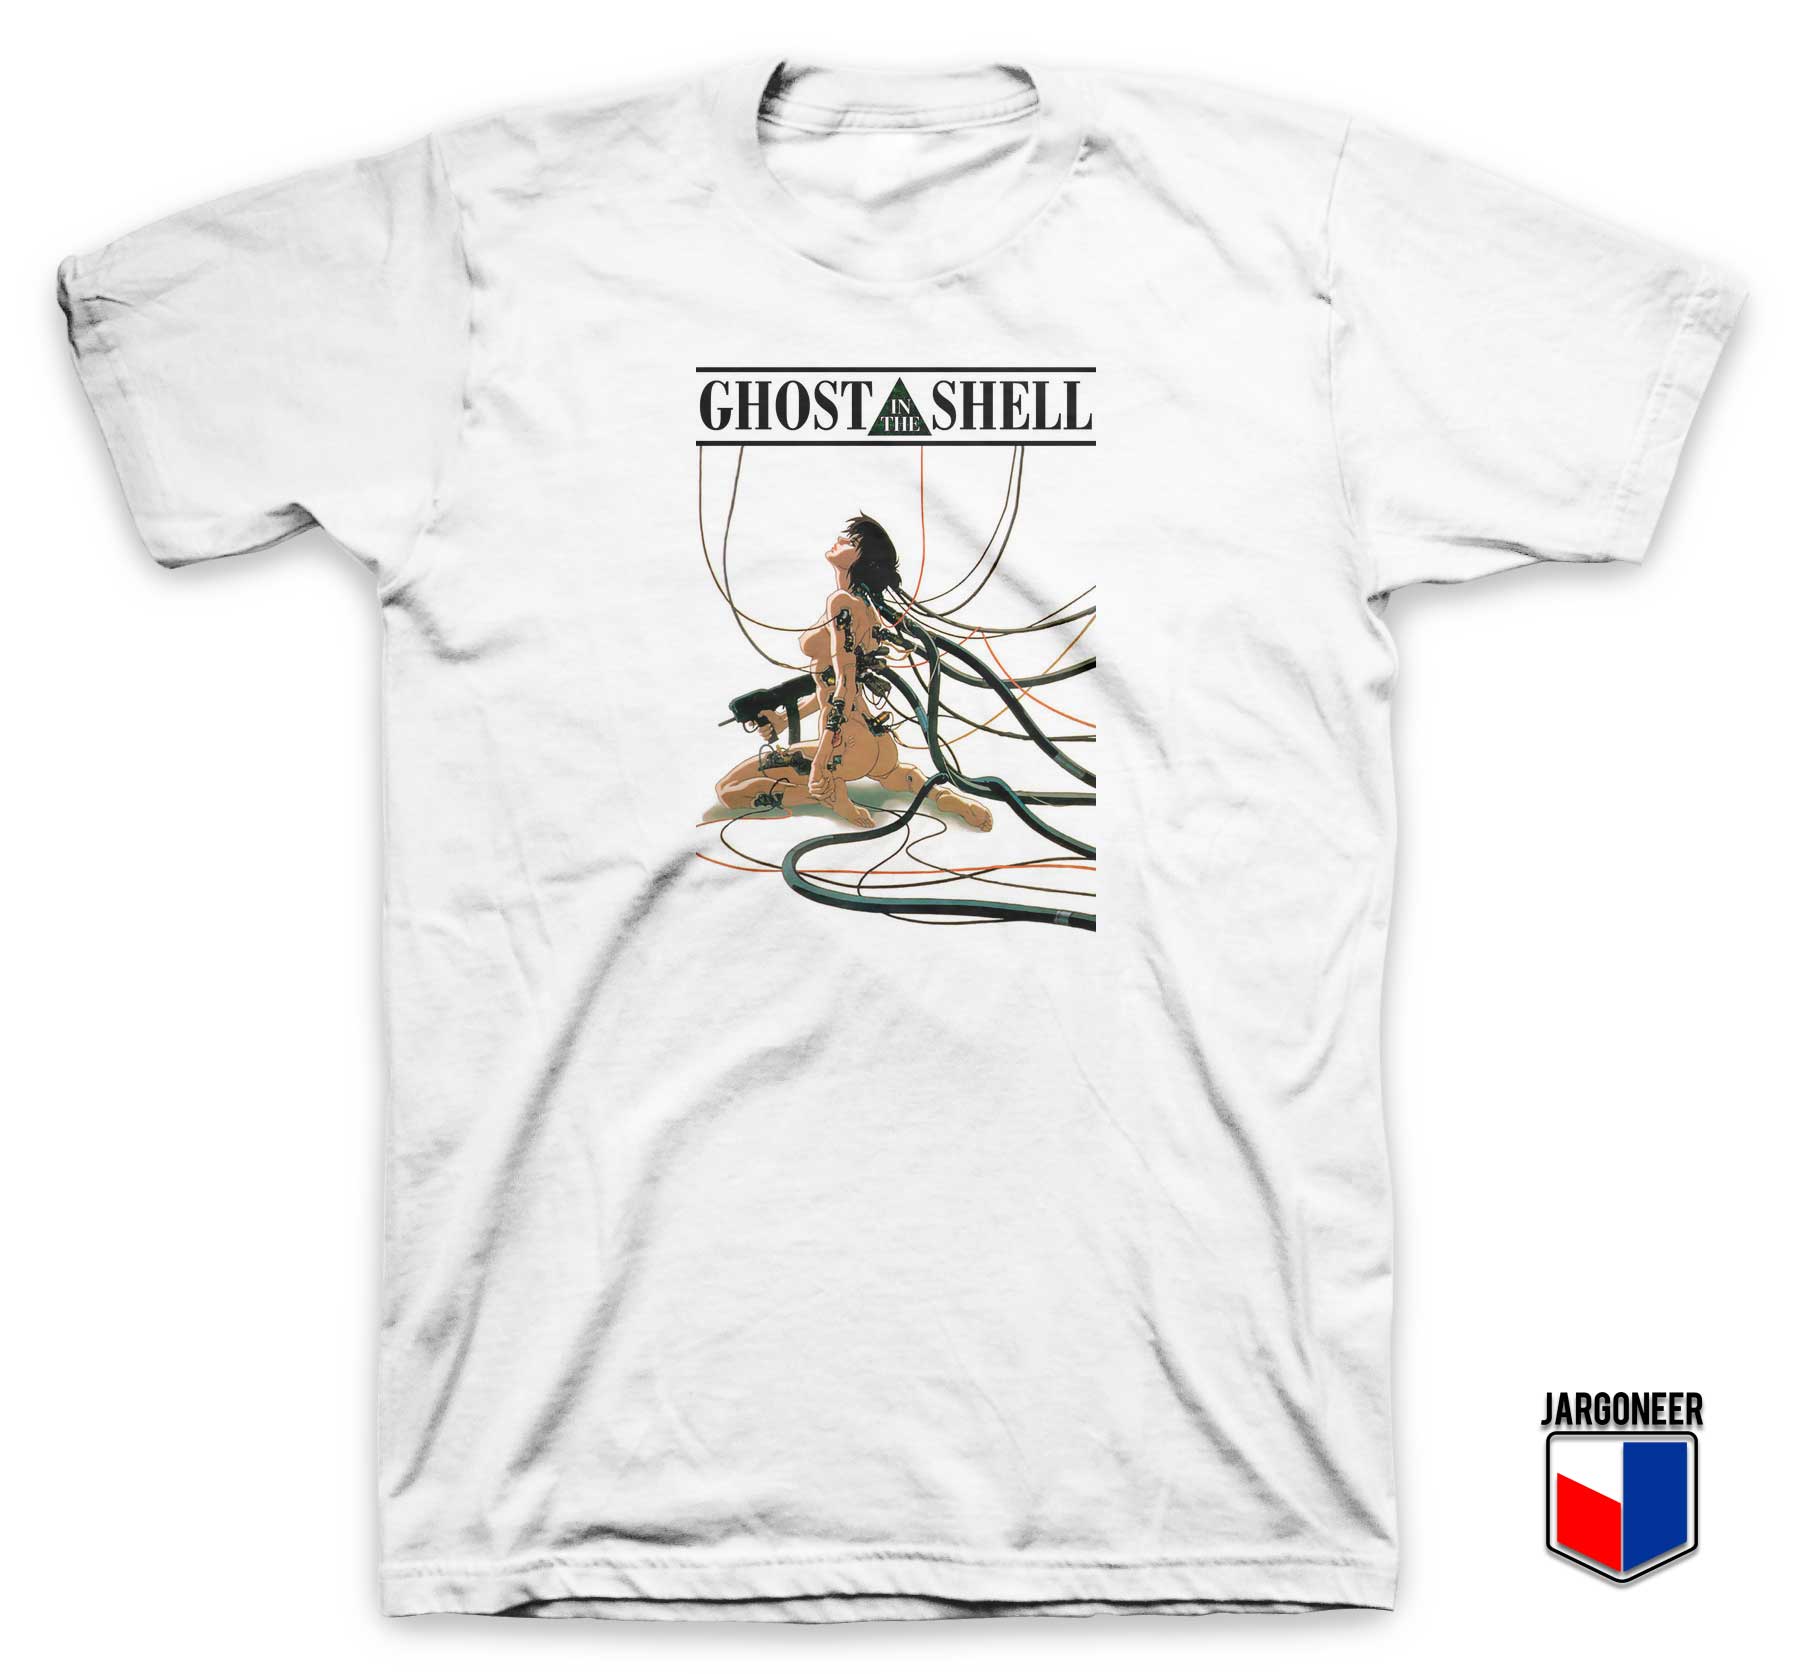 Ghost In The Shell T Shirt | Ghost In The Shell - Jargoneer.com